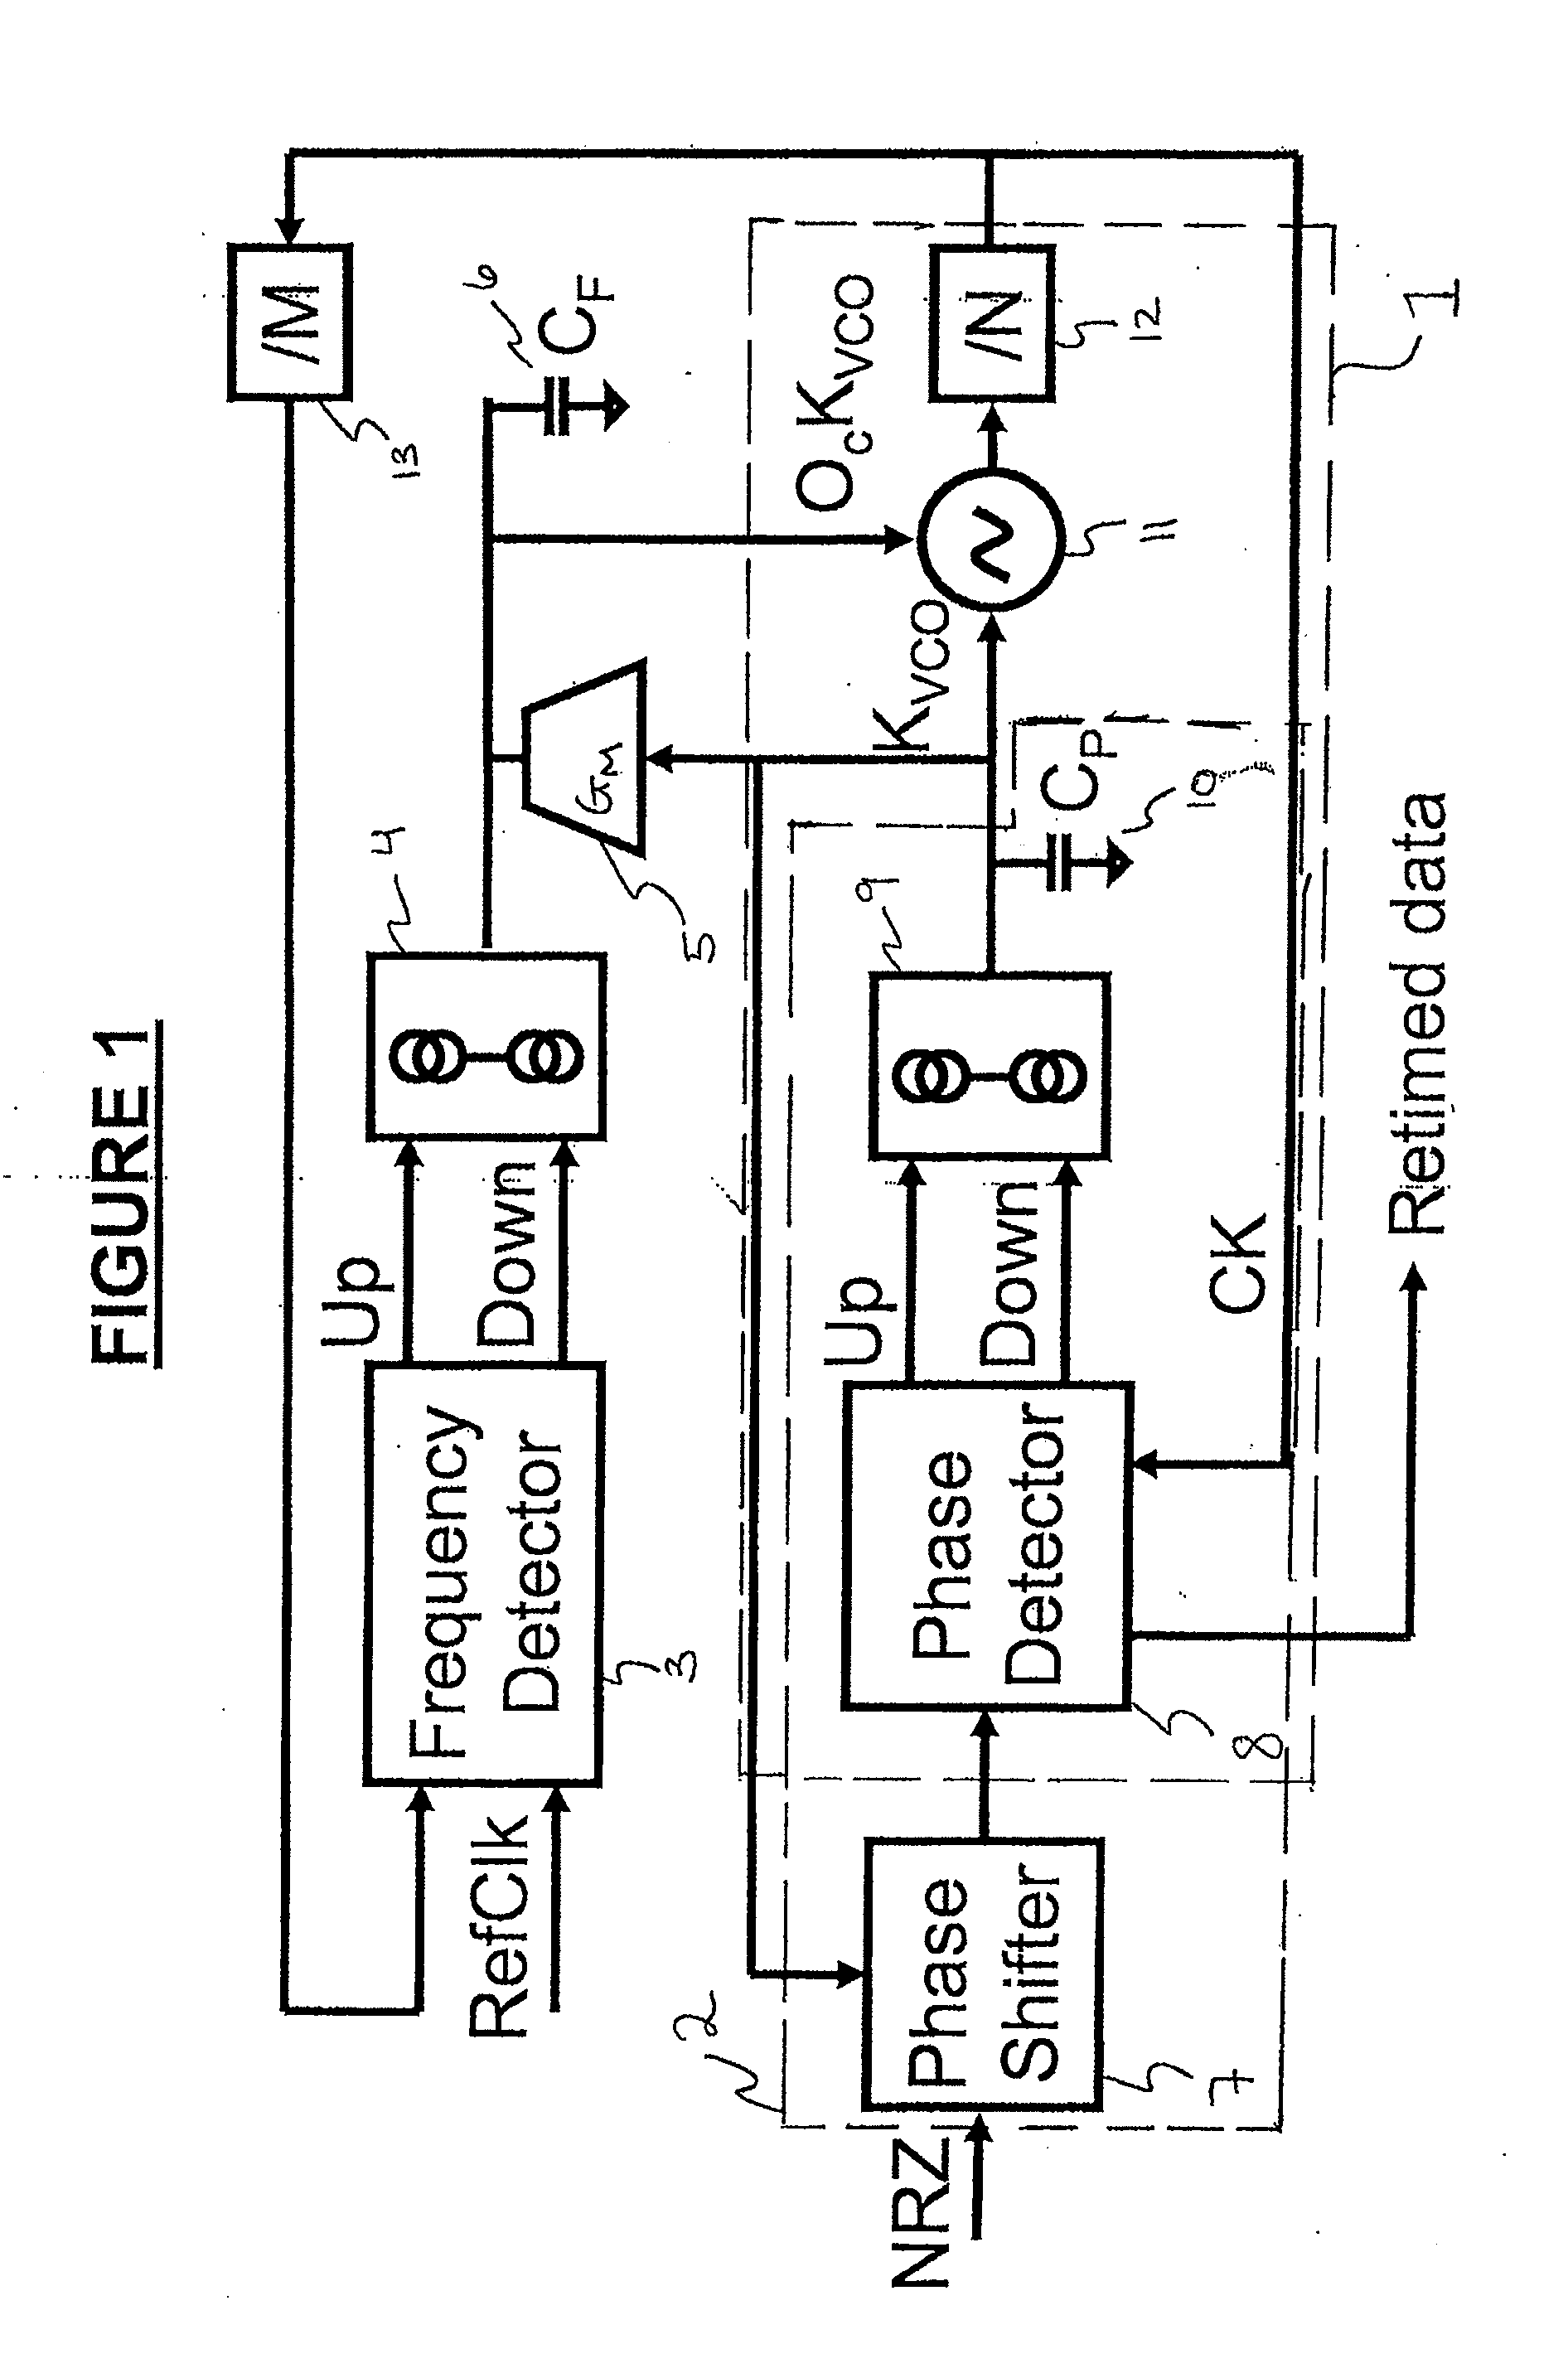 Continuous-rate clock recovery circuit